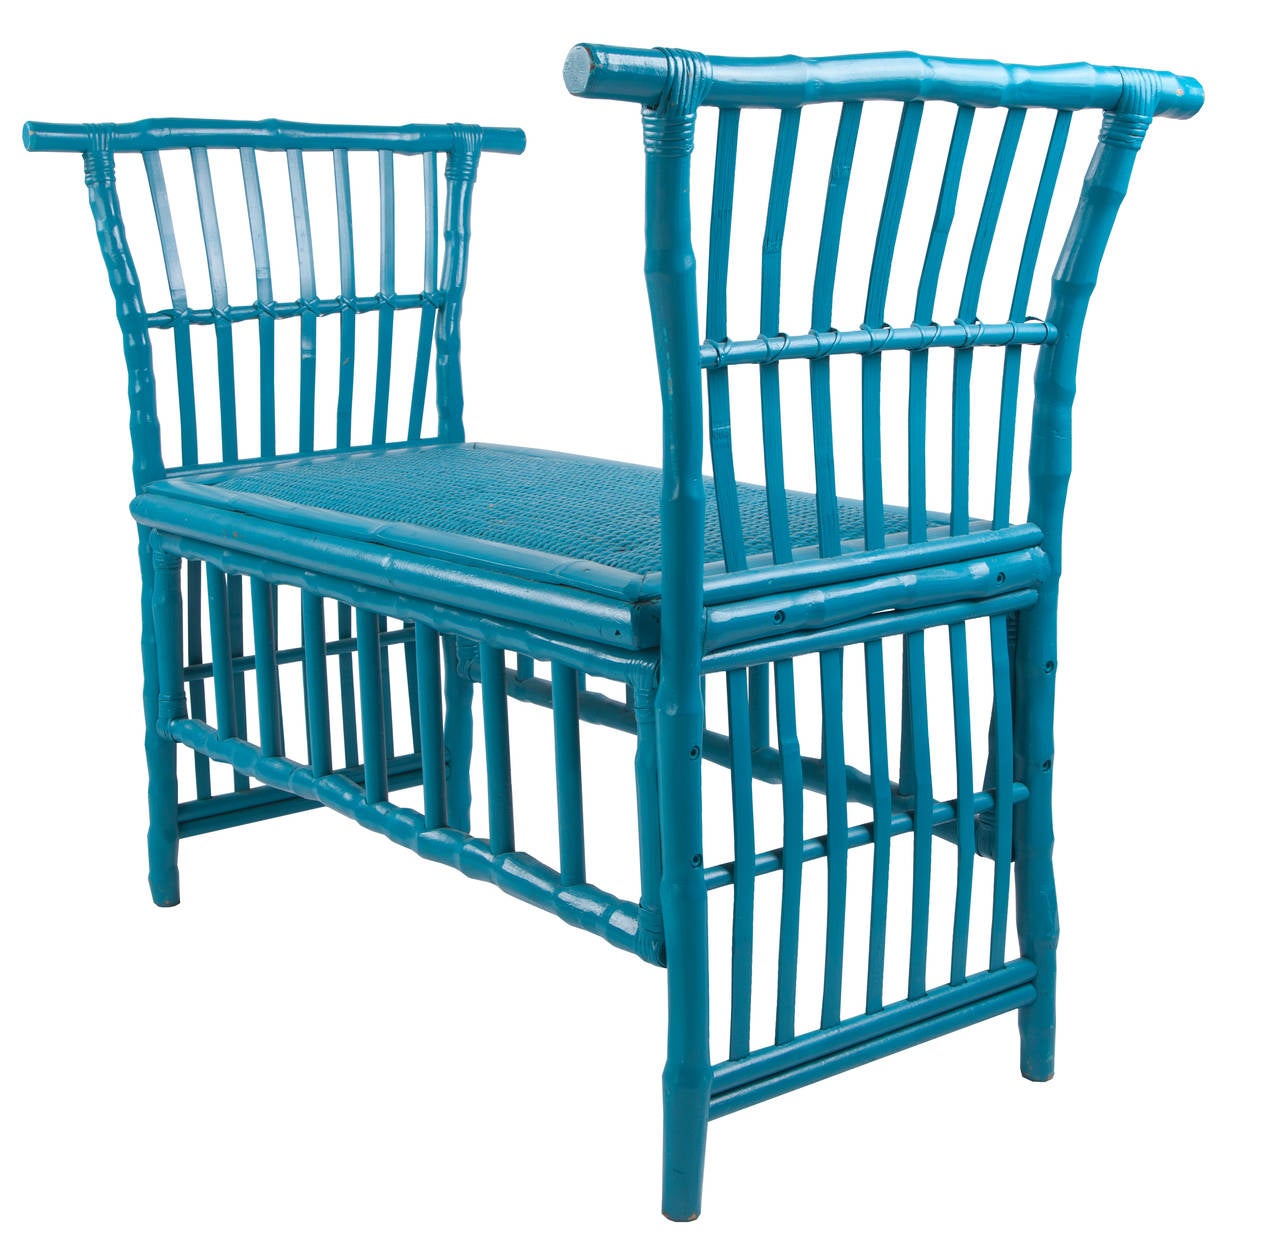 American Fabulous Turquoise Rattan Bench For Sale